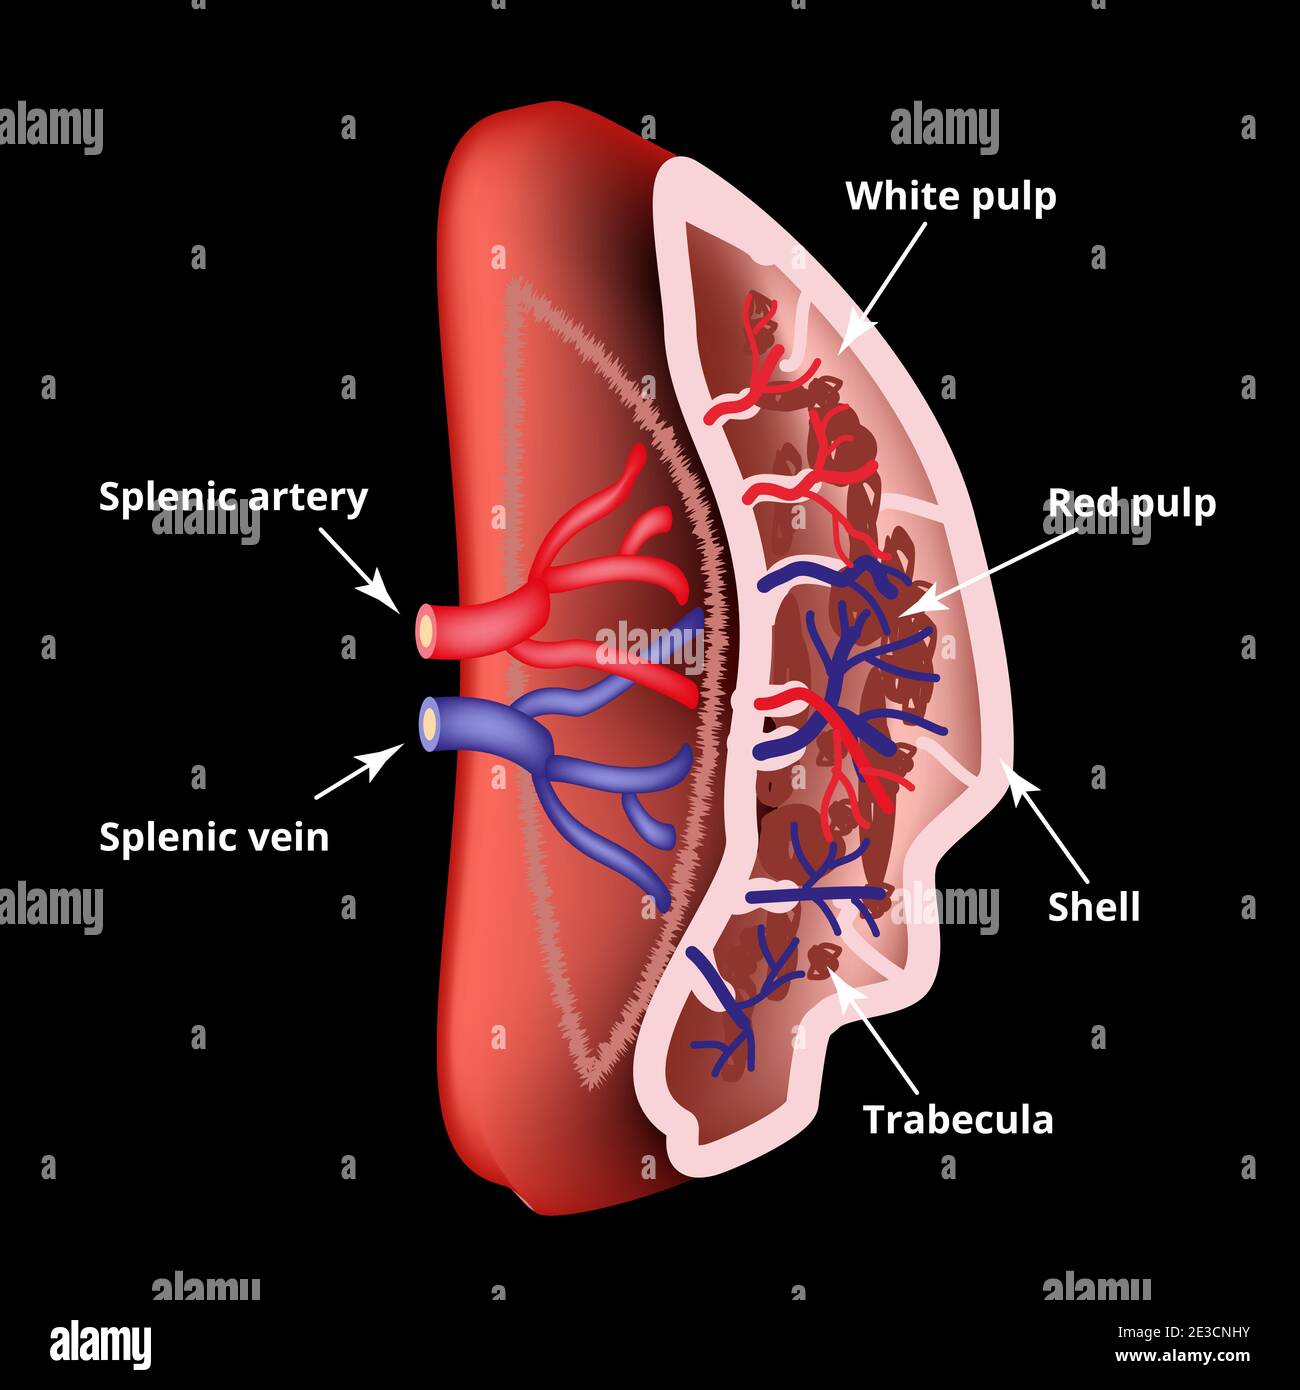 Anatomical structure of the spleen. Vector illustration. Stock Vector